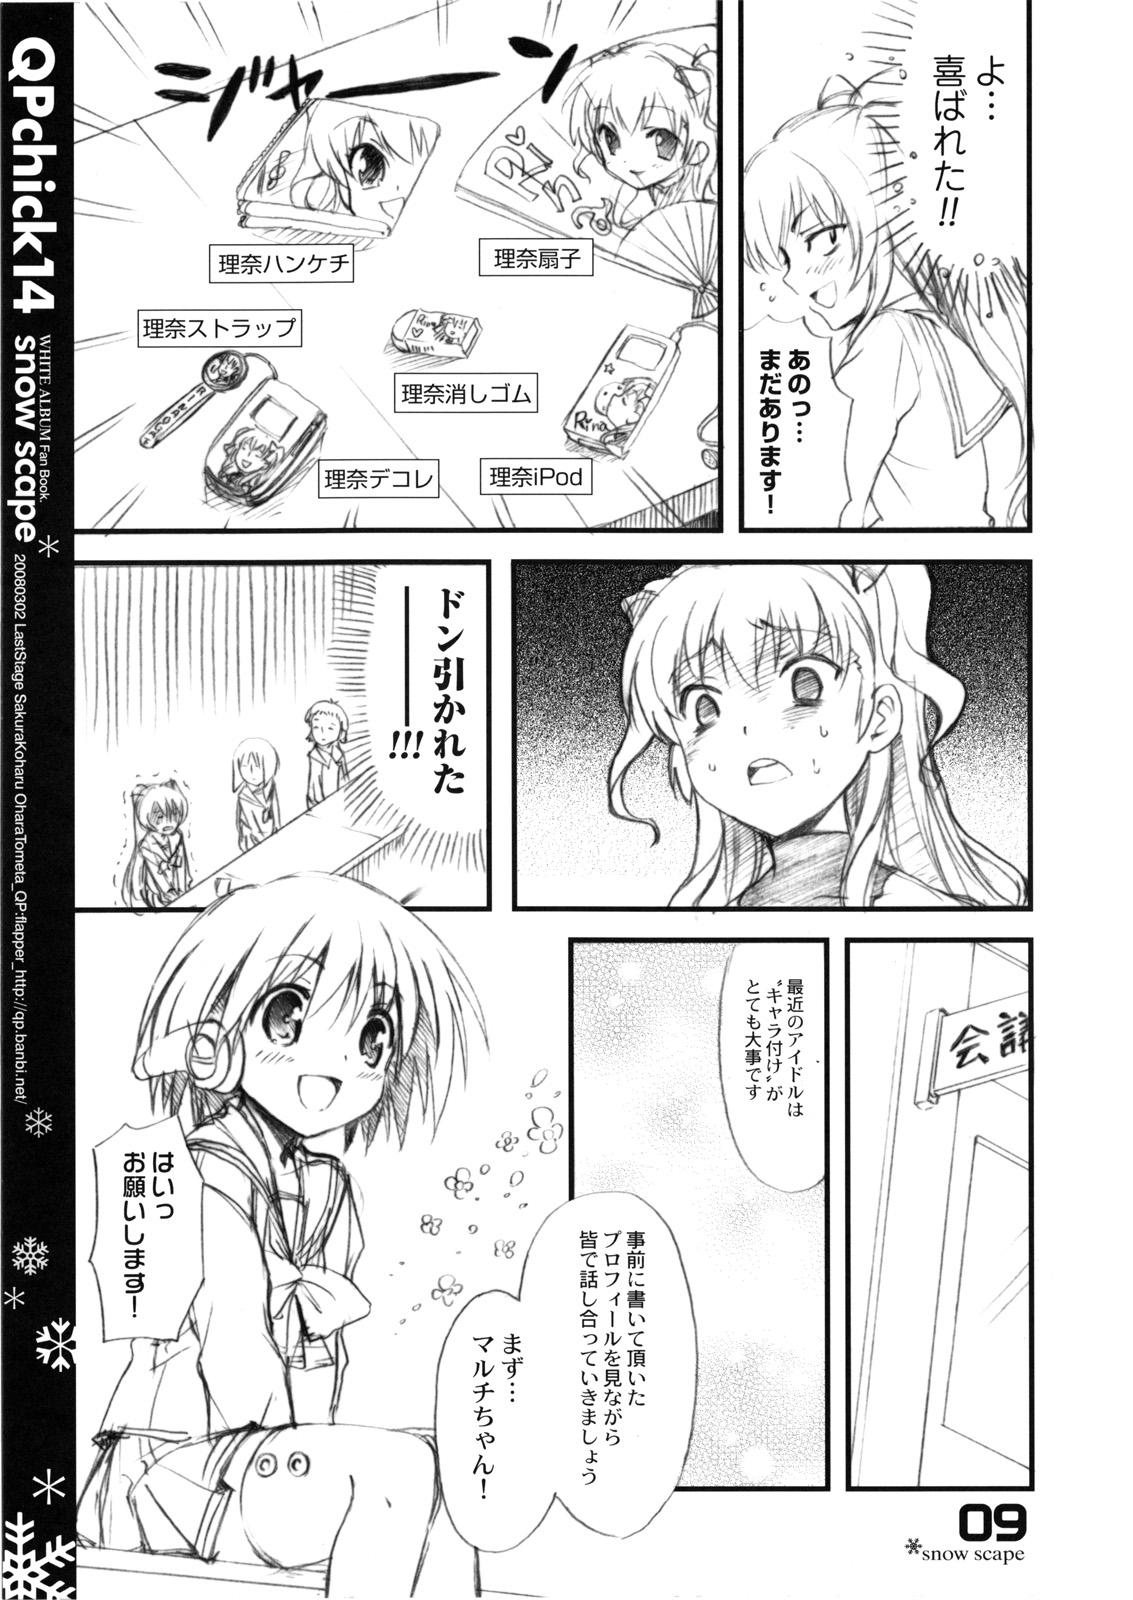 Gay Smoking QPchick 14 snow scape - White album Hard - Page 10